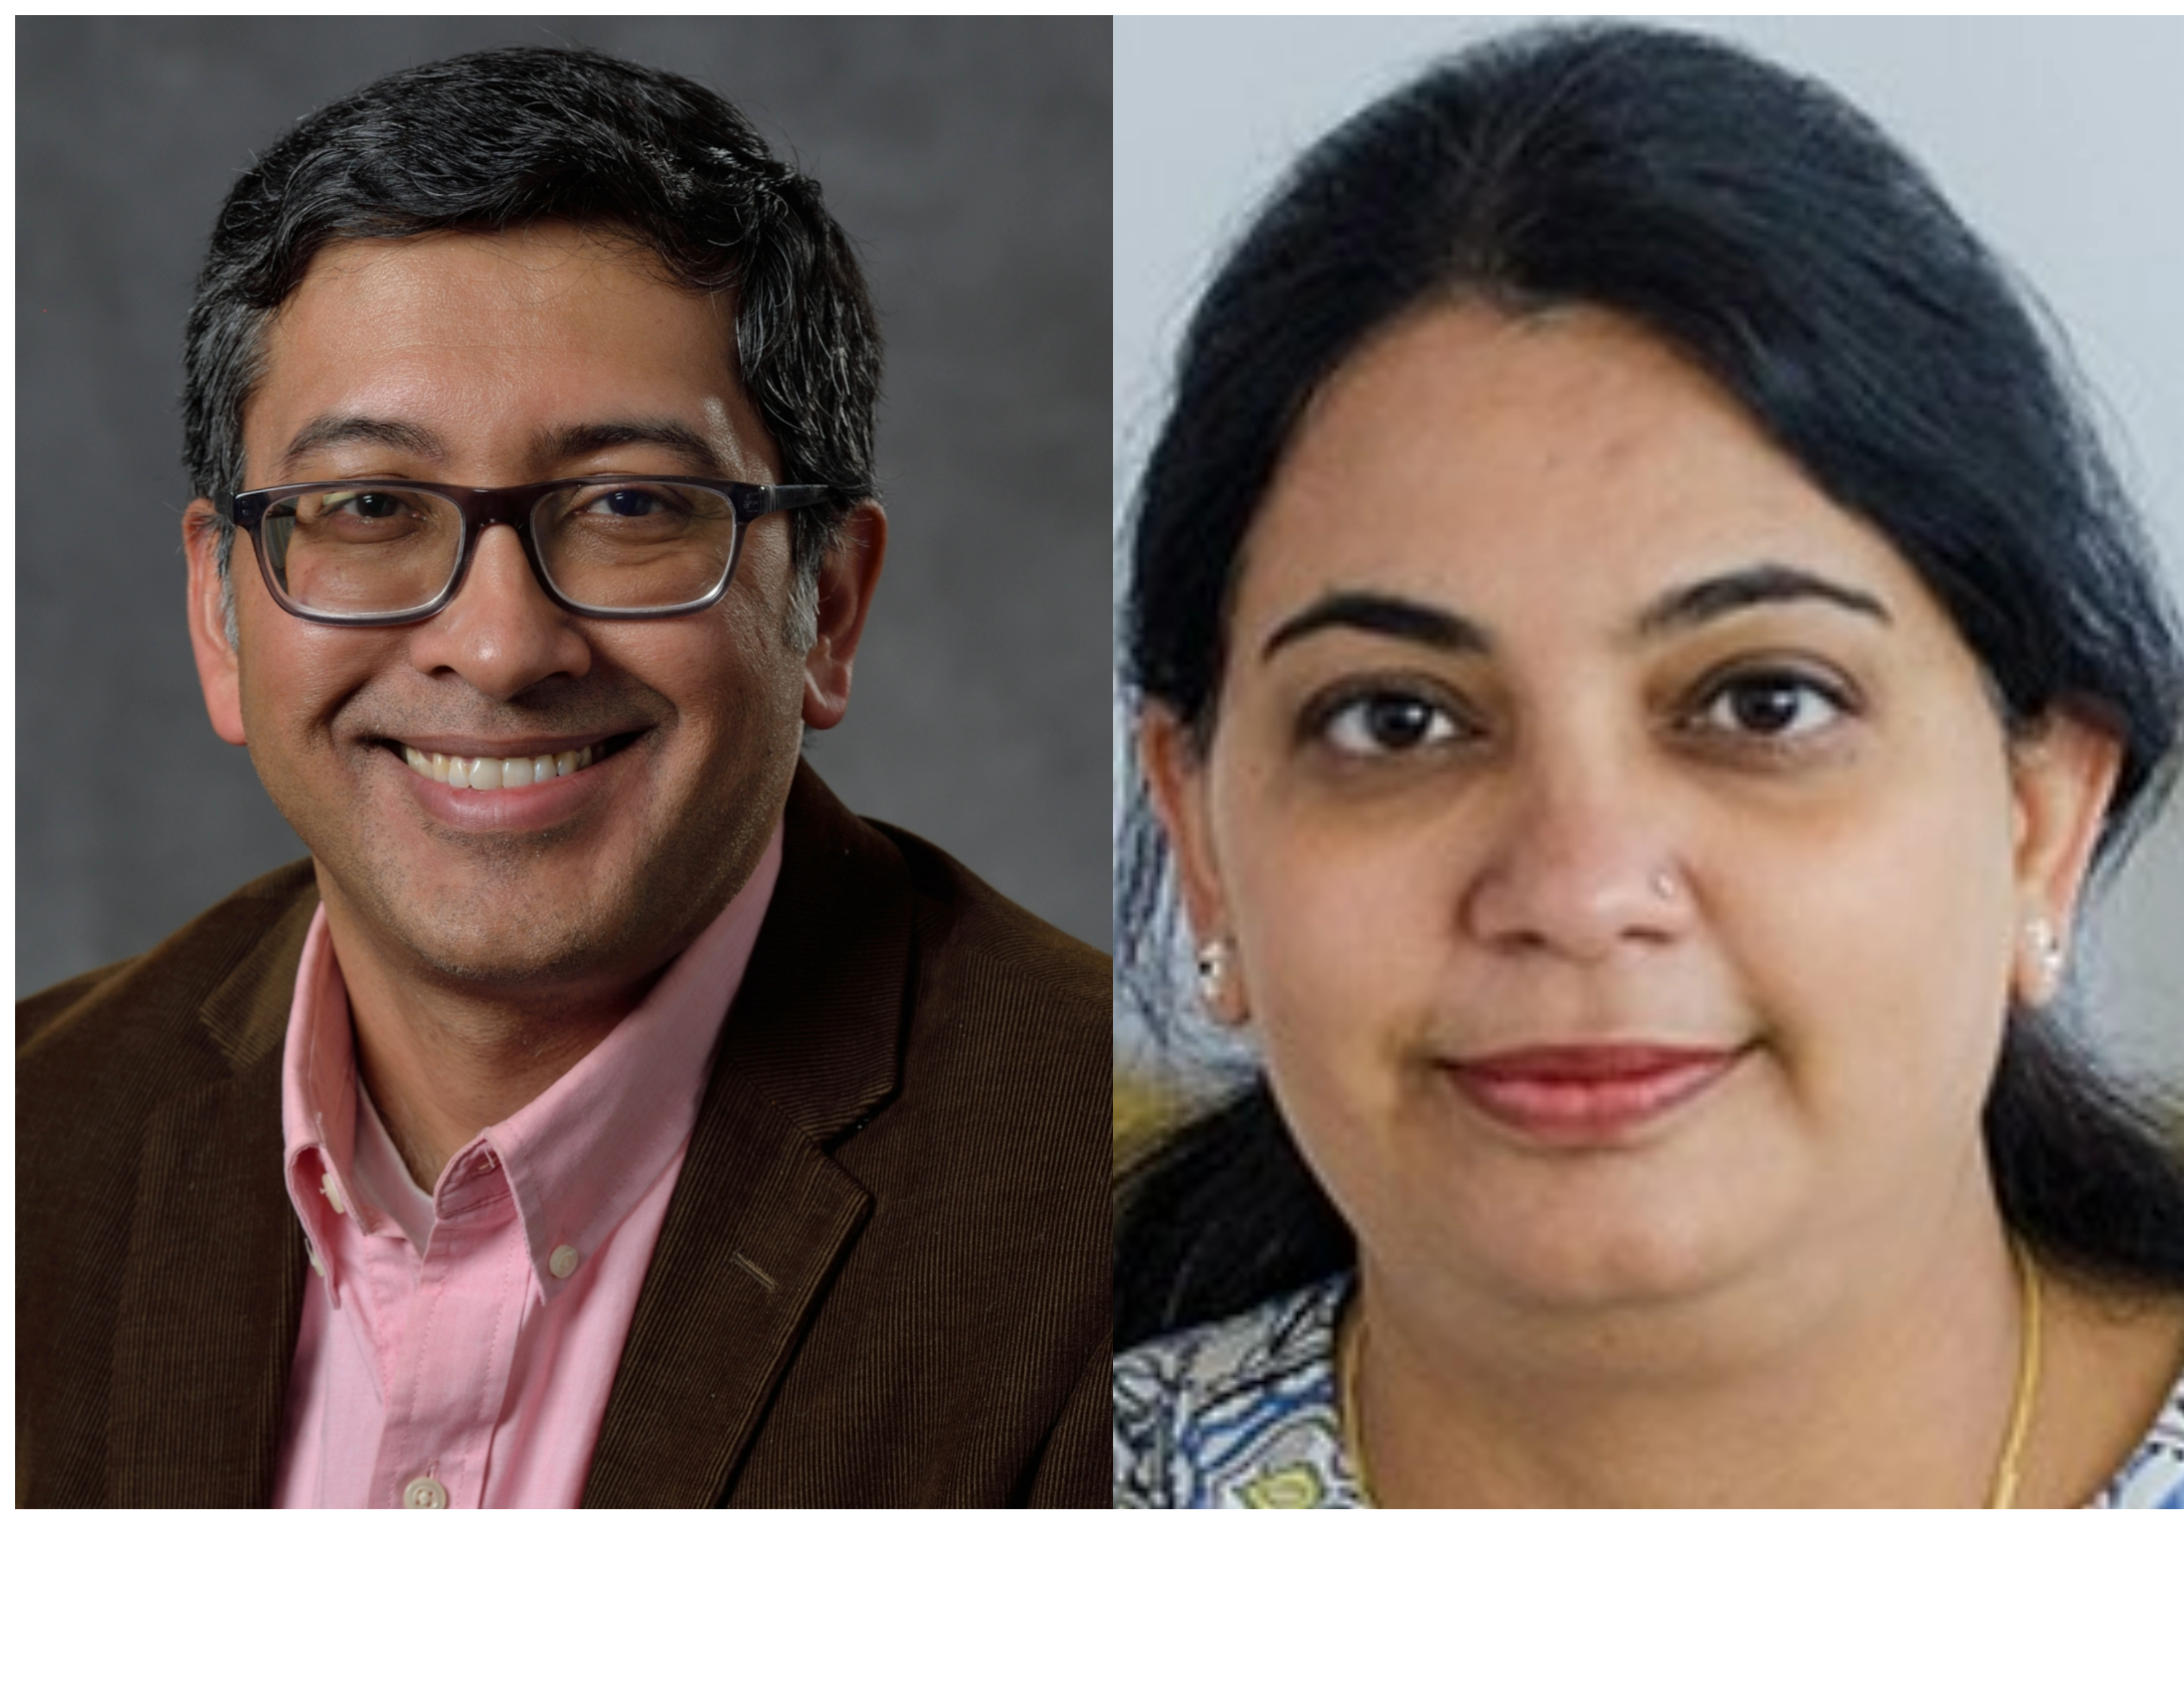 Drs. Bhattacharya and Tewari-Singh Elected to ASPET Executive Roles